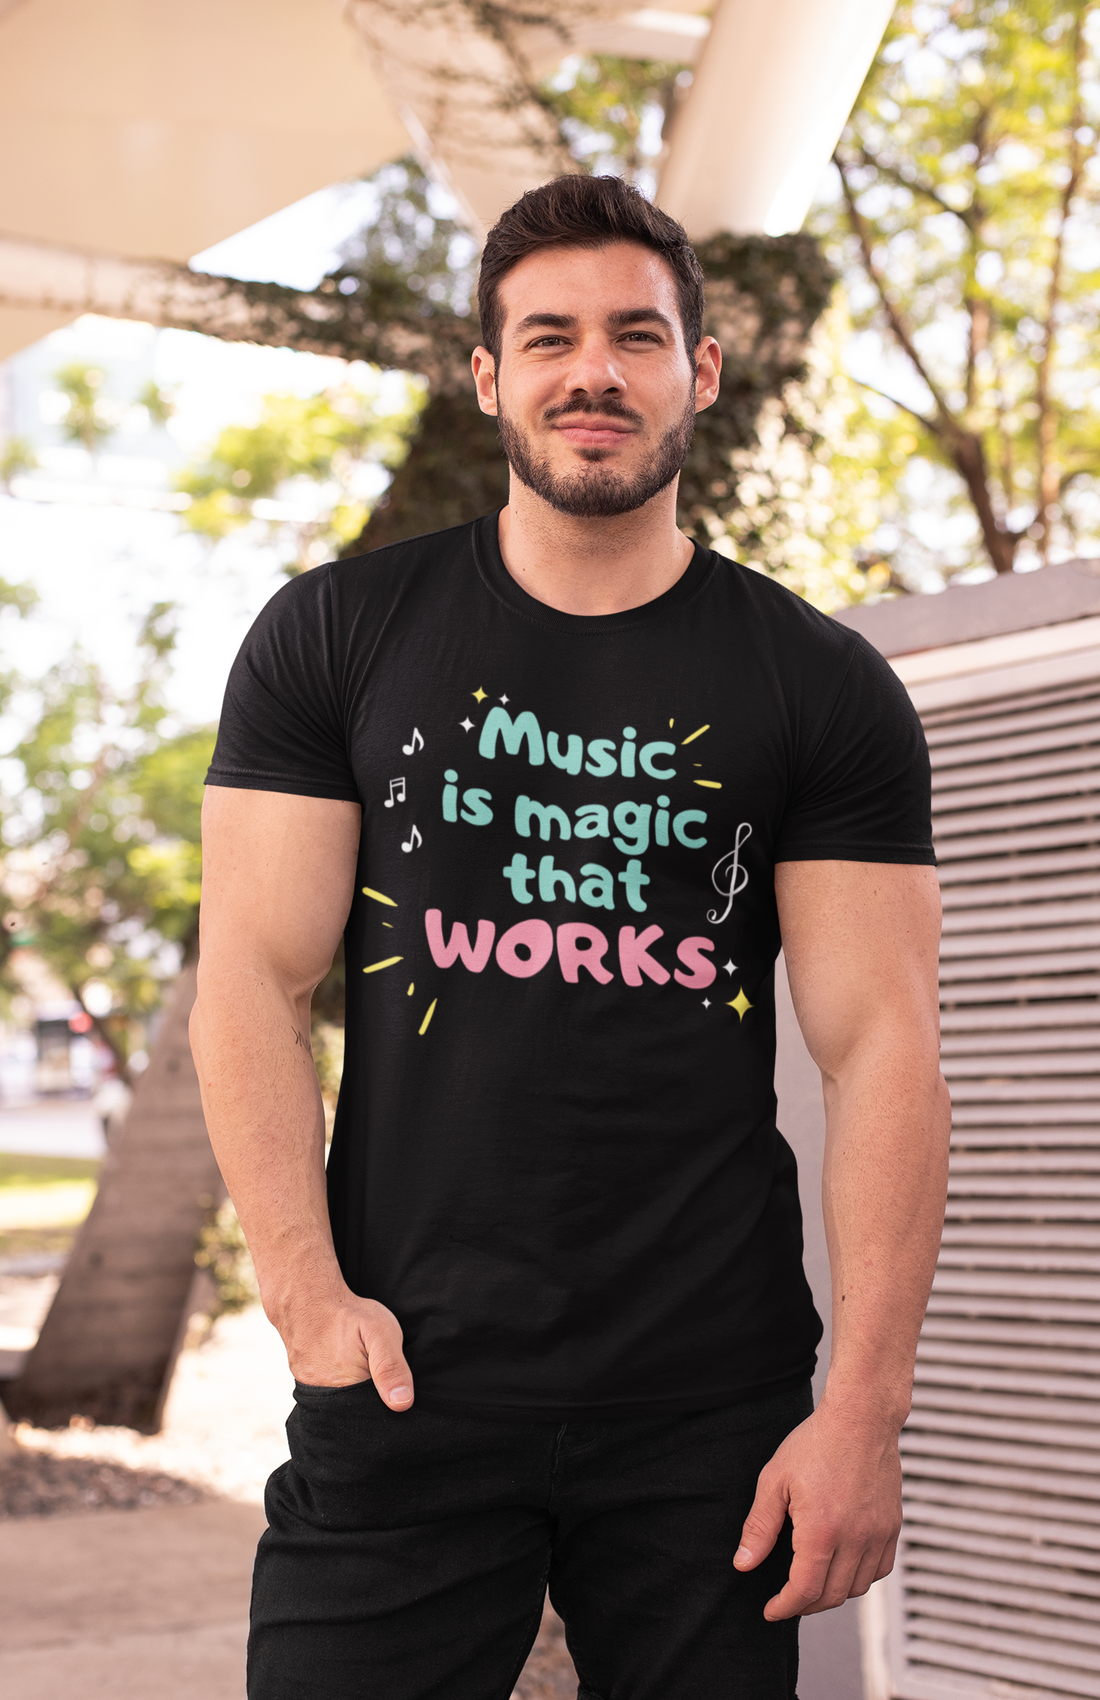 a music tshirt design with the text "music is magic that WORKS"